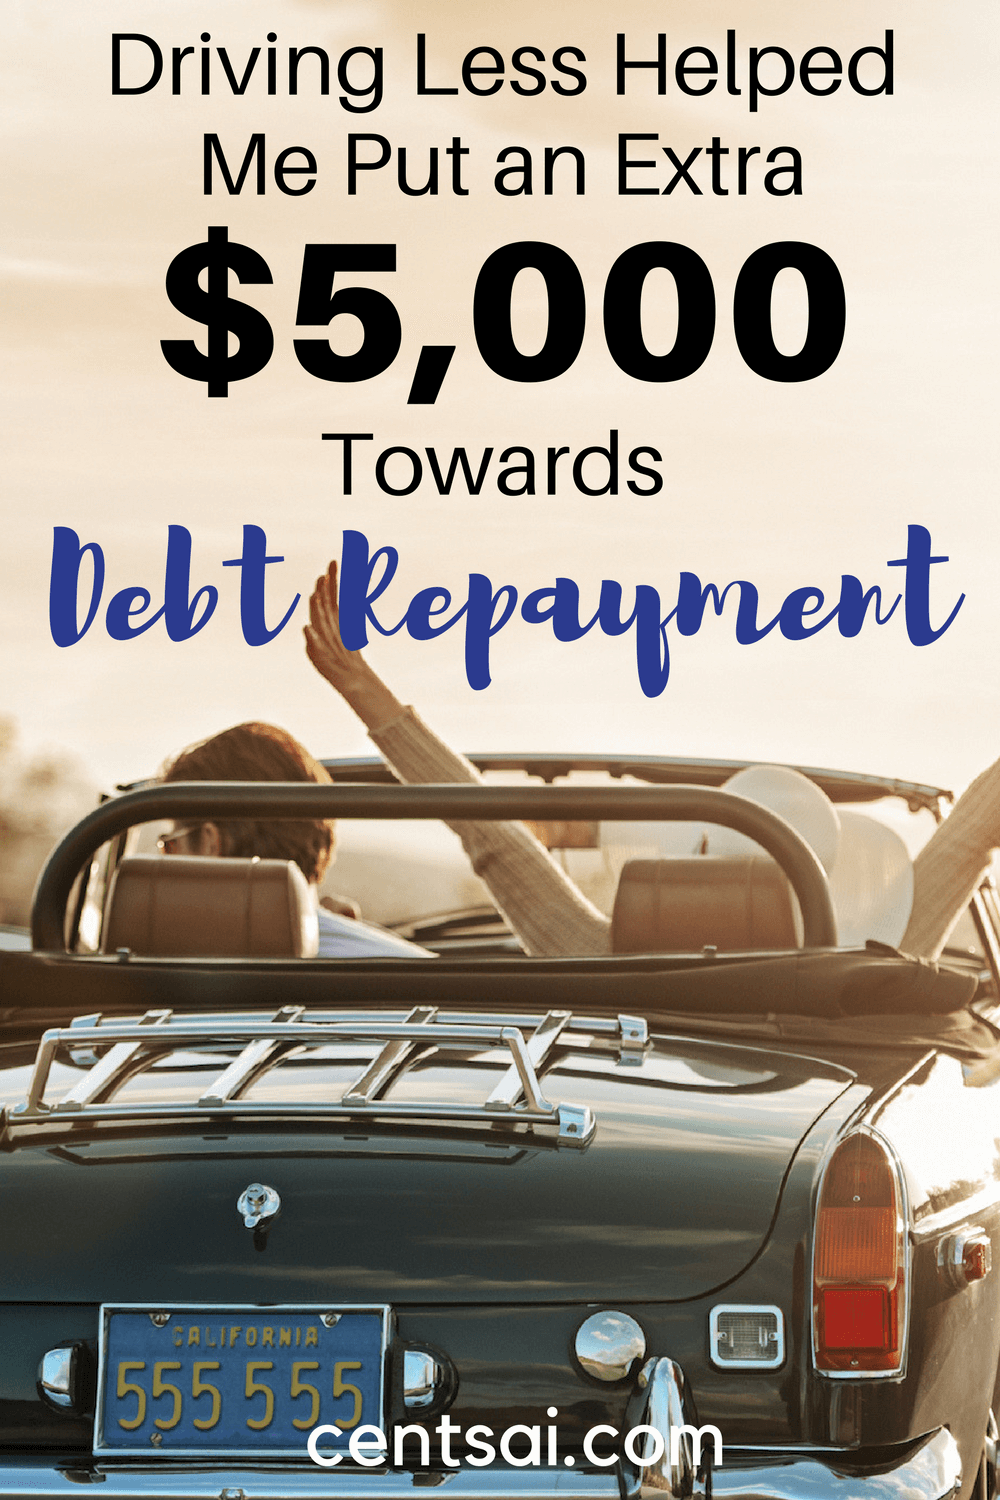 Driving Less Helped Me Put an Extra $5,000 Towards Debt Repayment